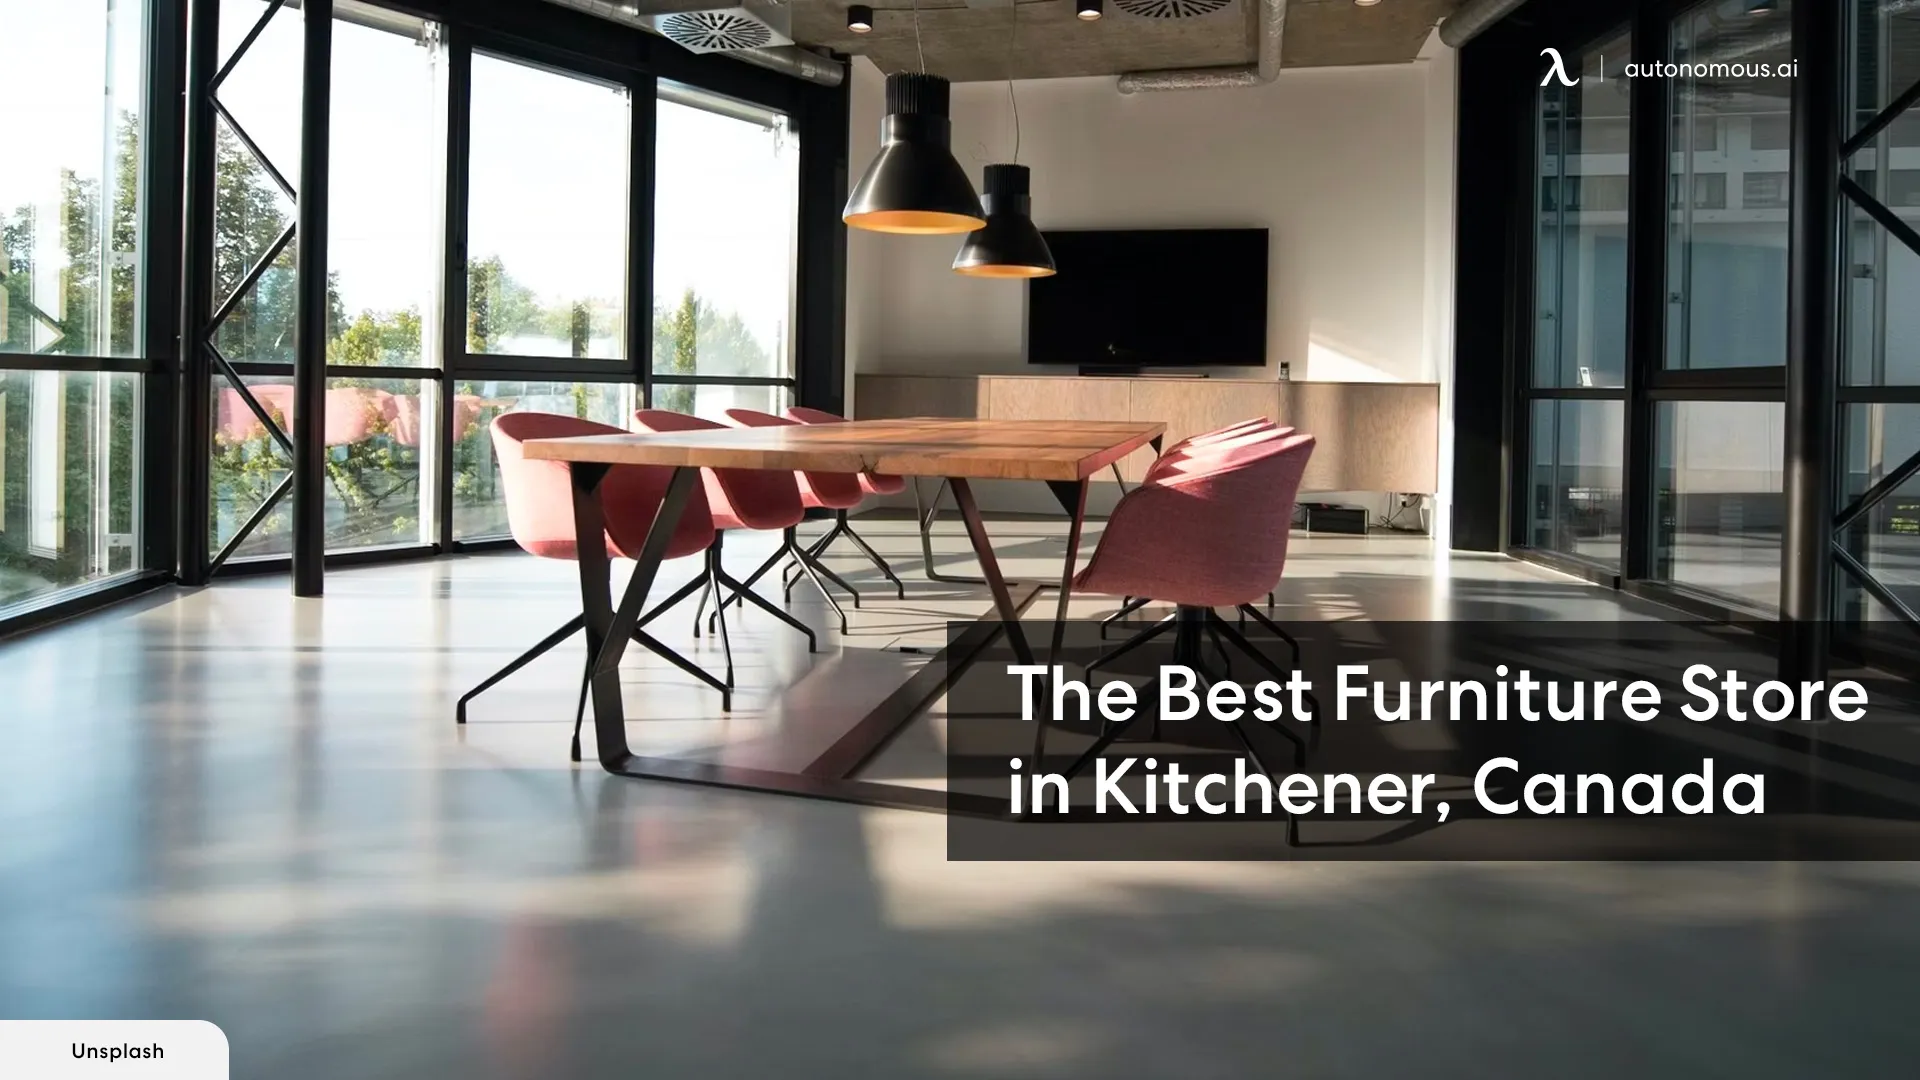 Complete Guide: Finding the Best Furniture Stores in Kitchener, Canada